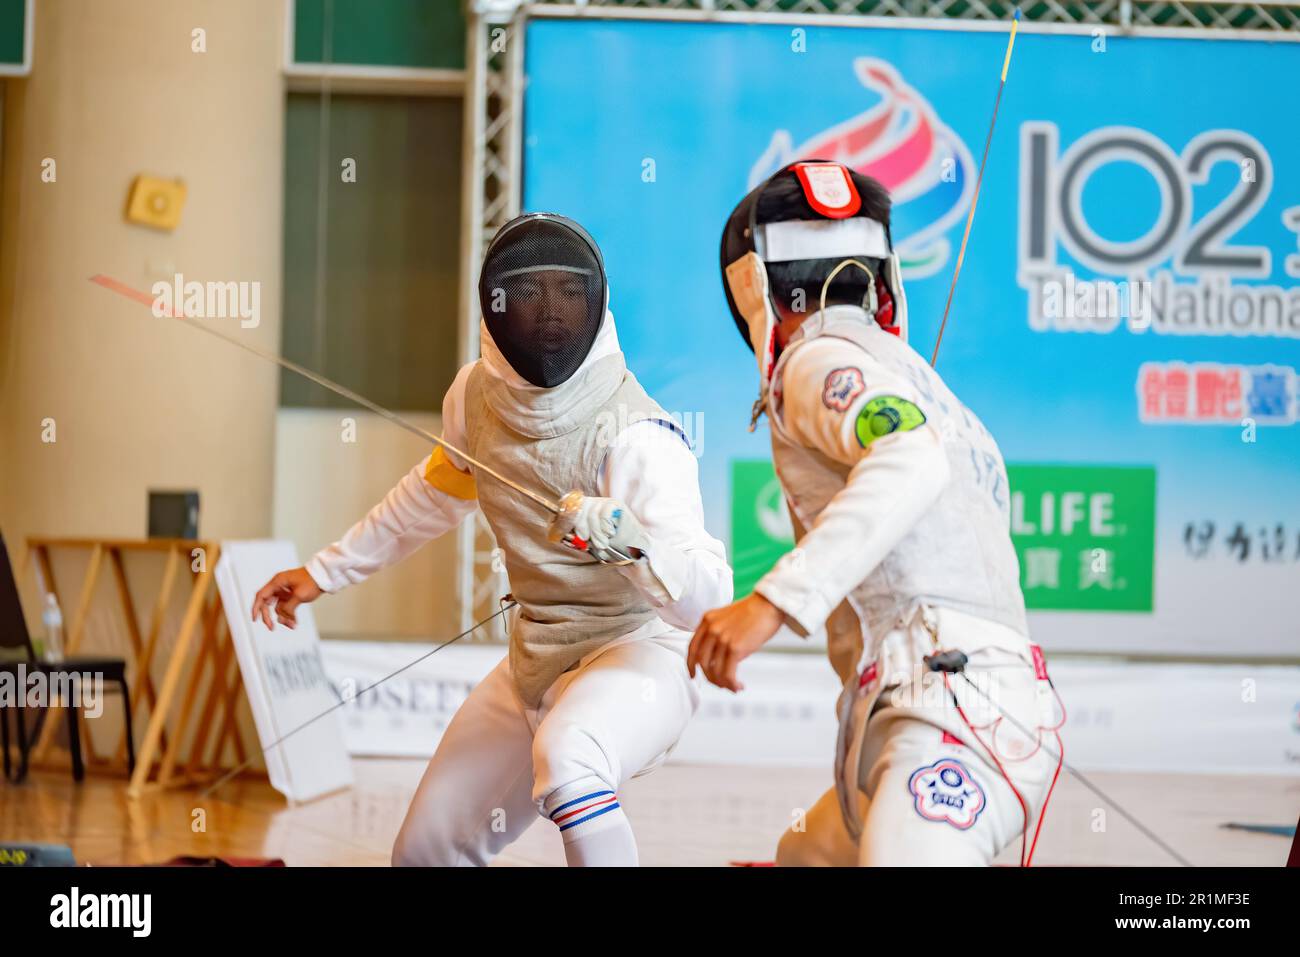 Taiwan, MAR 22 2013 - Fencing competition of The National Games Stock Photo